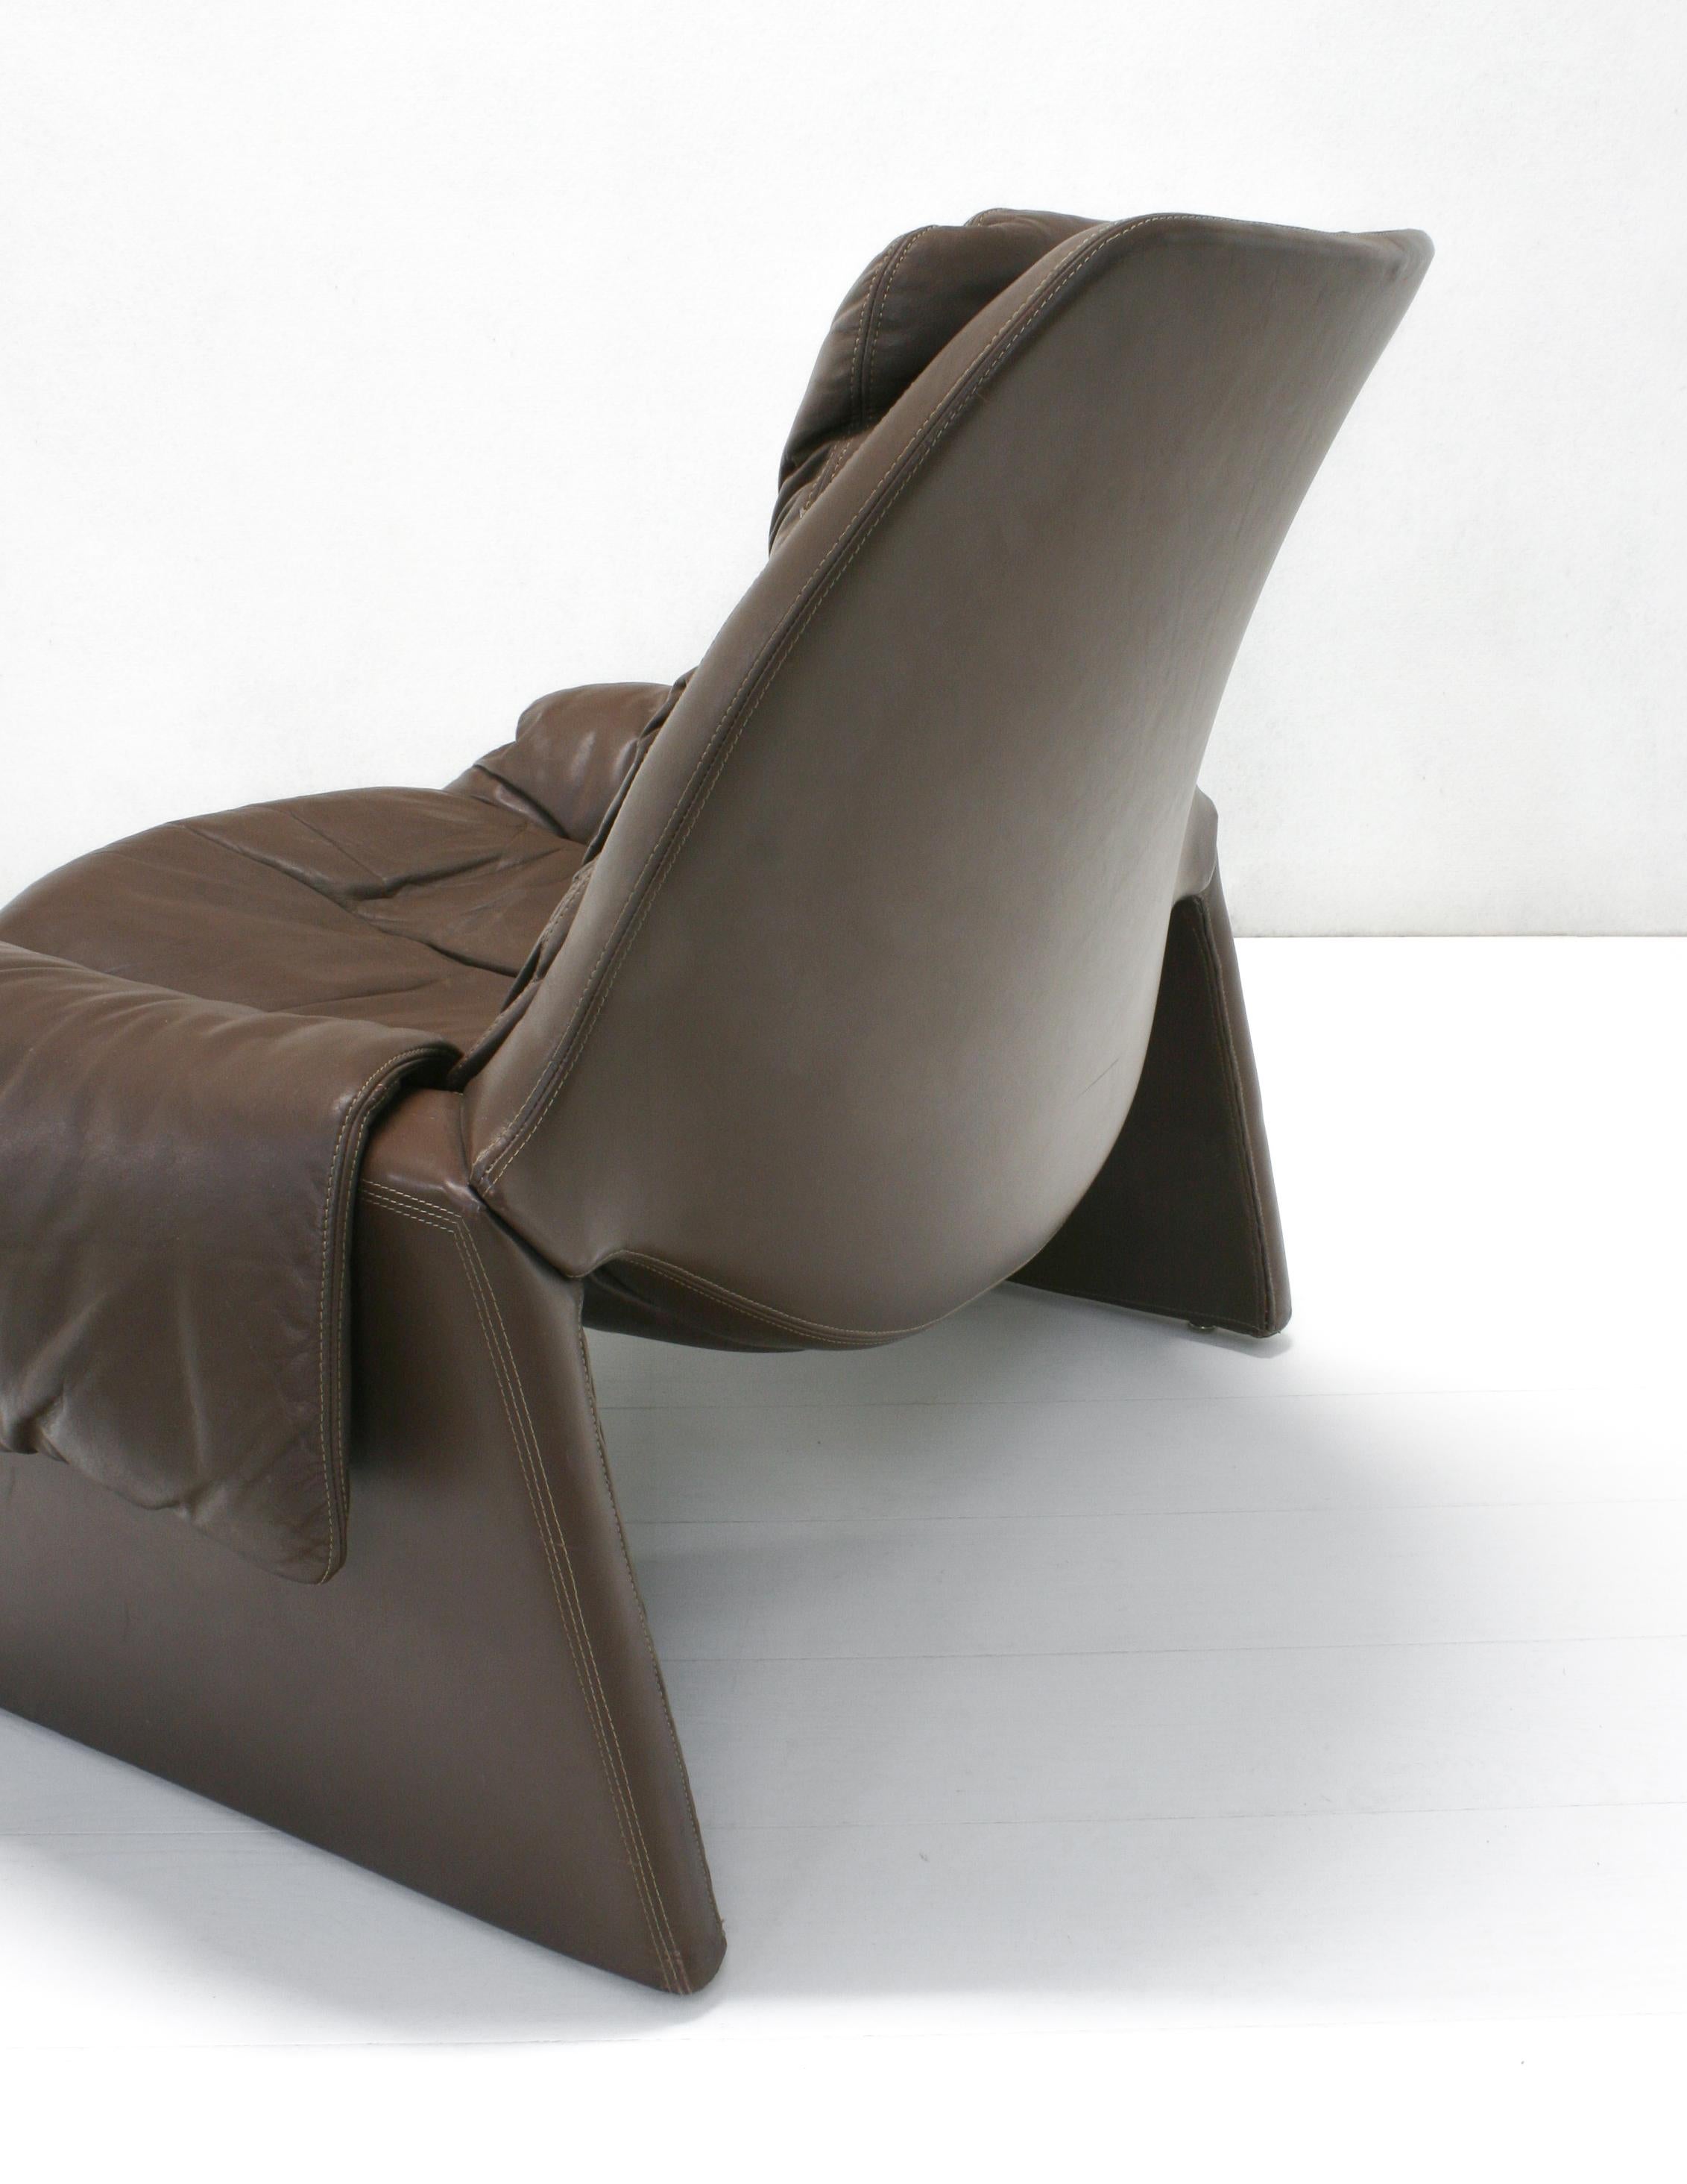 1970s Proposals P60 Lounge Chair & P61 Ottoman by Vittorio Introini for Saporiti For Sale 4